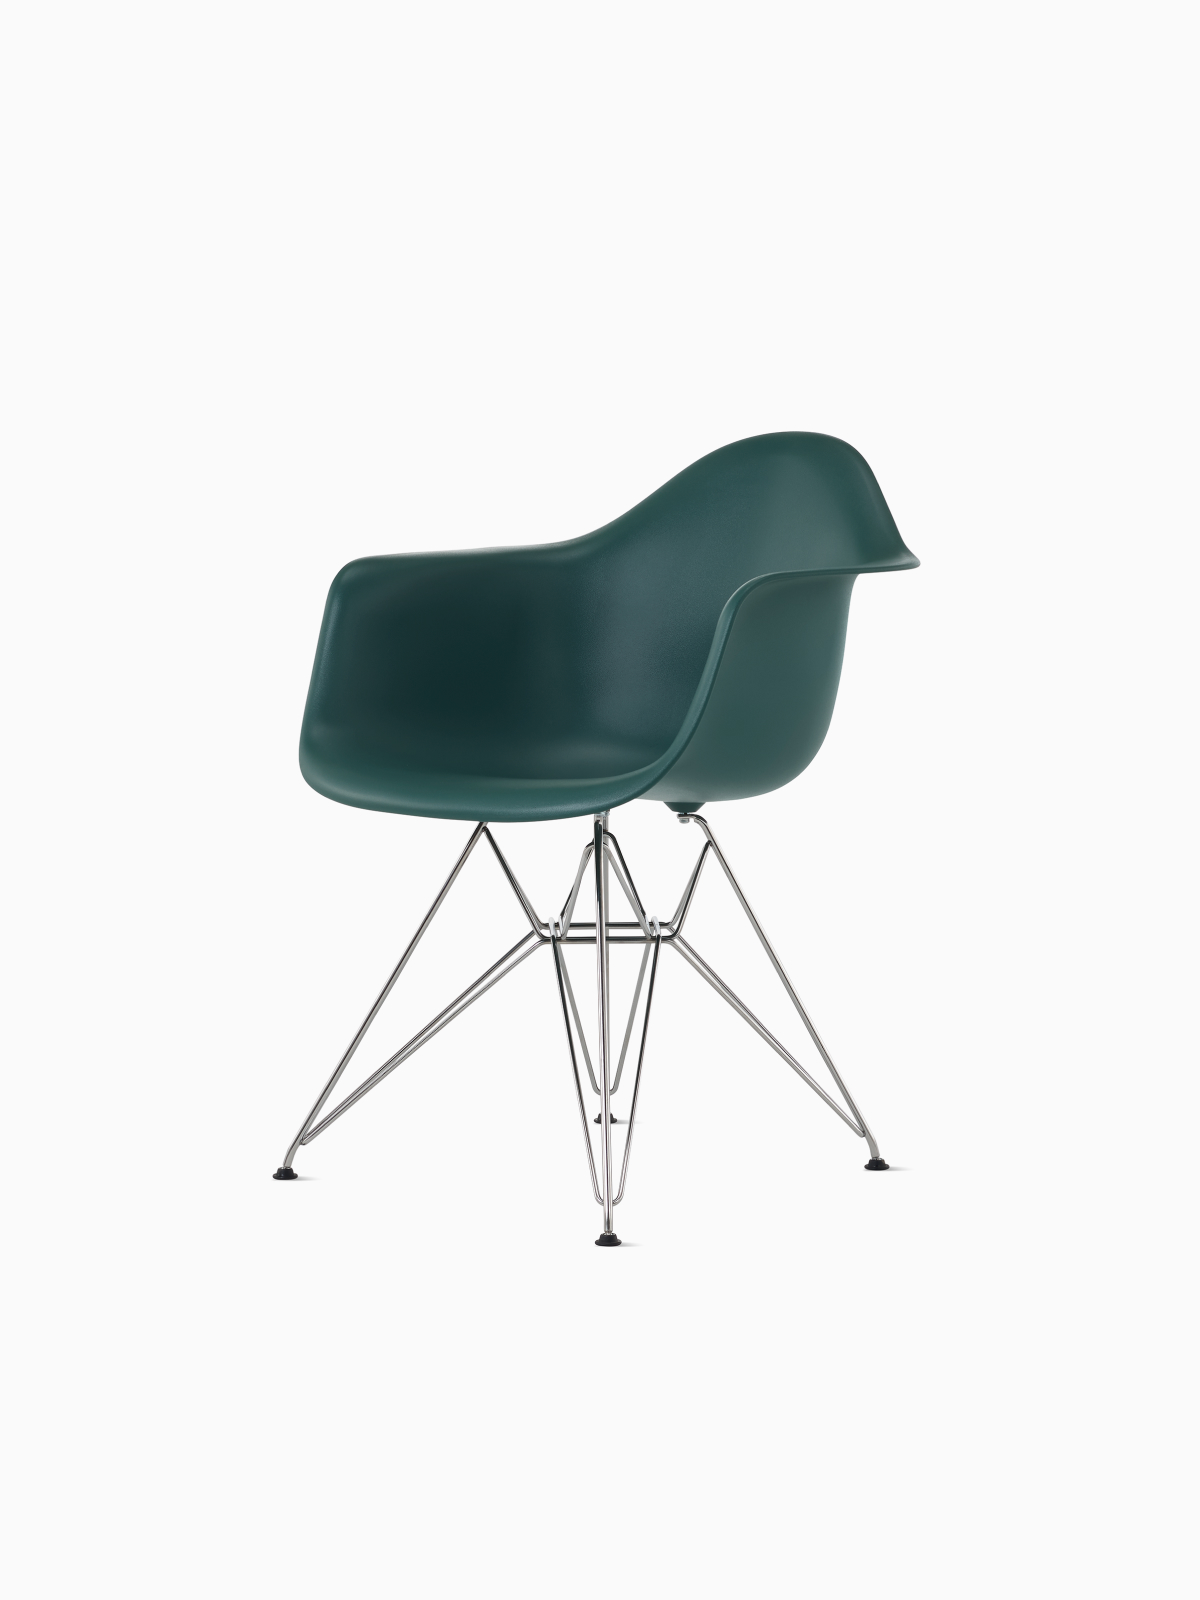 Eames Moulded Plastic Chairs